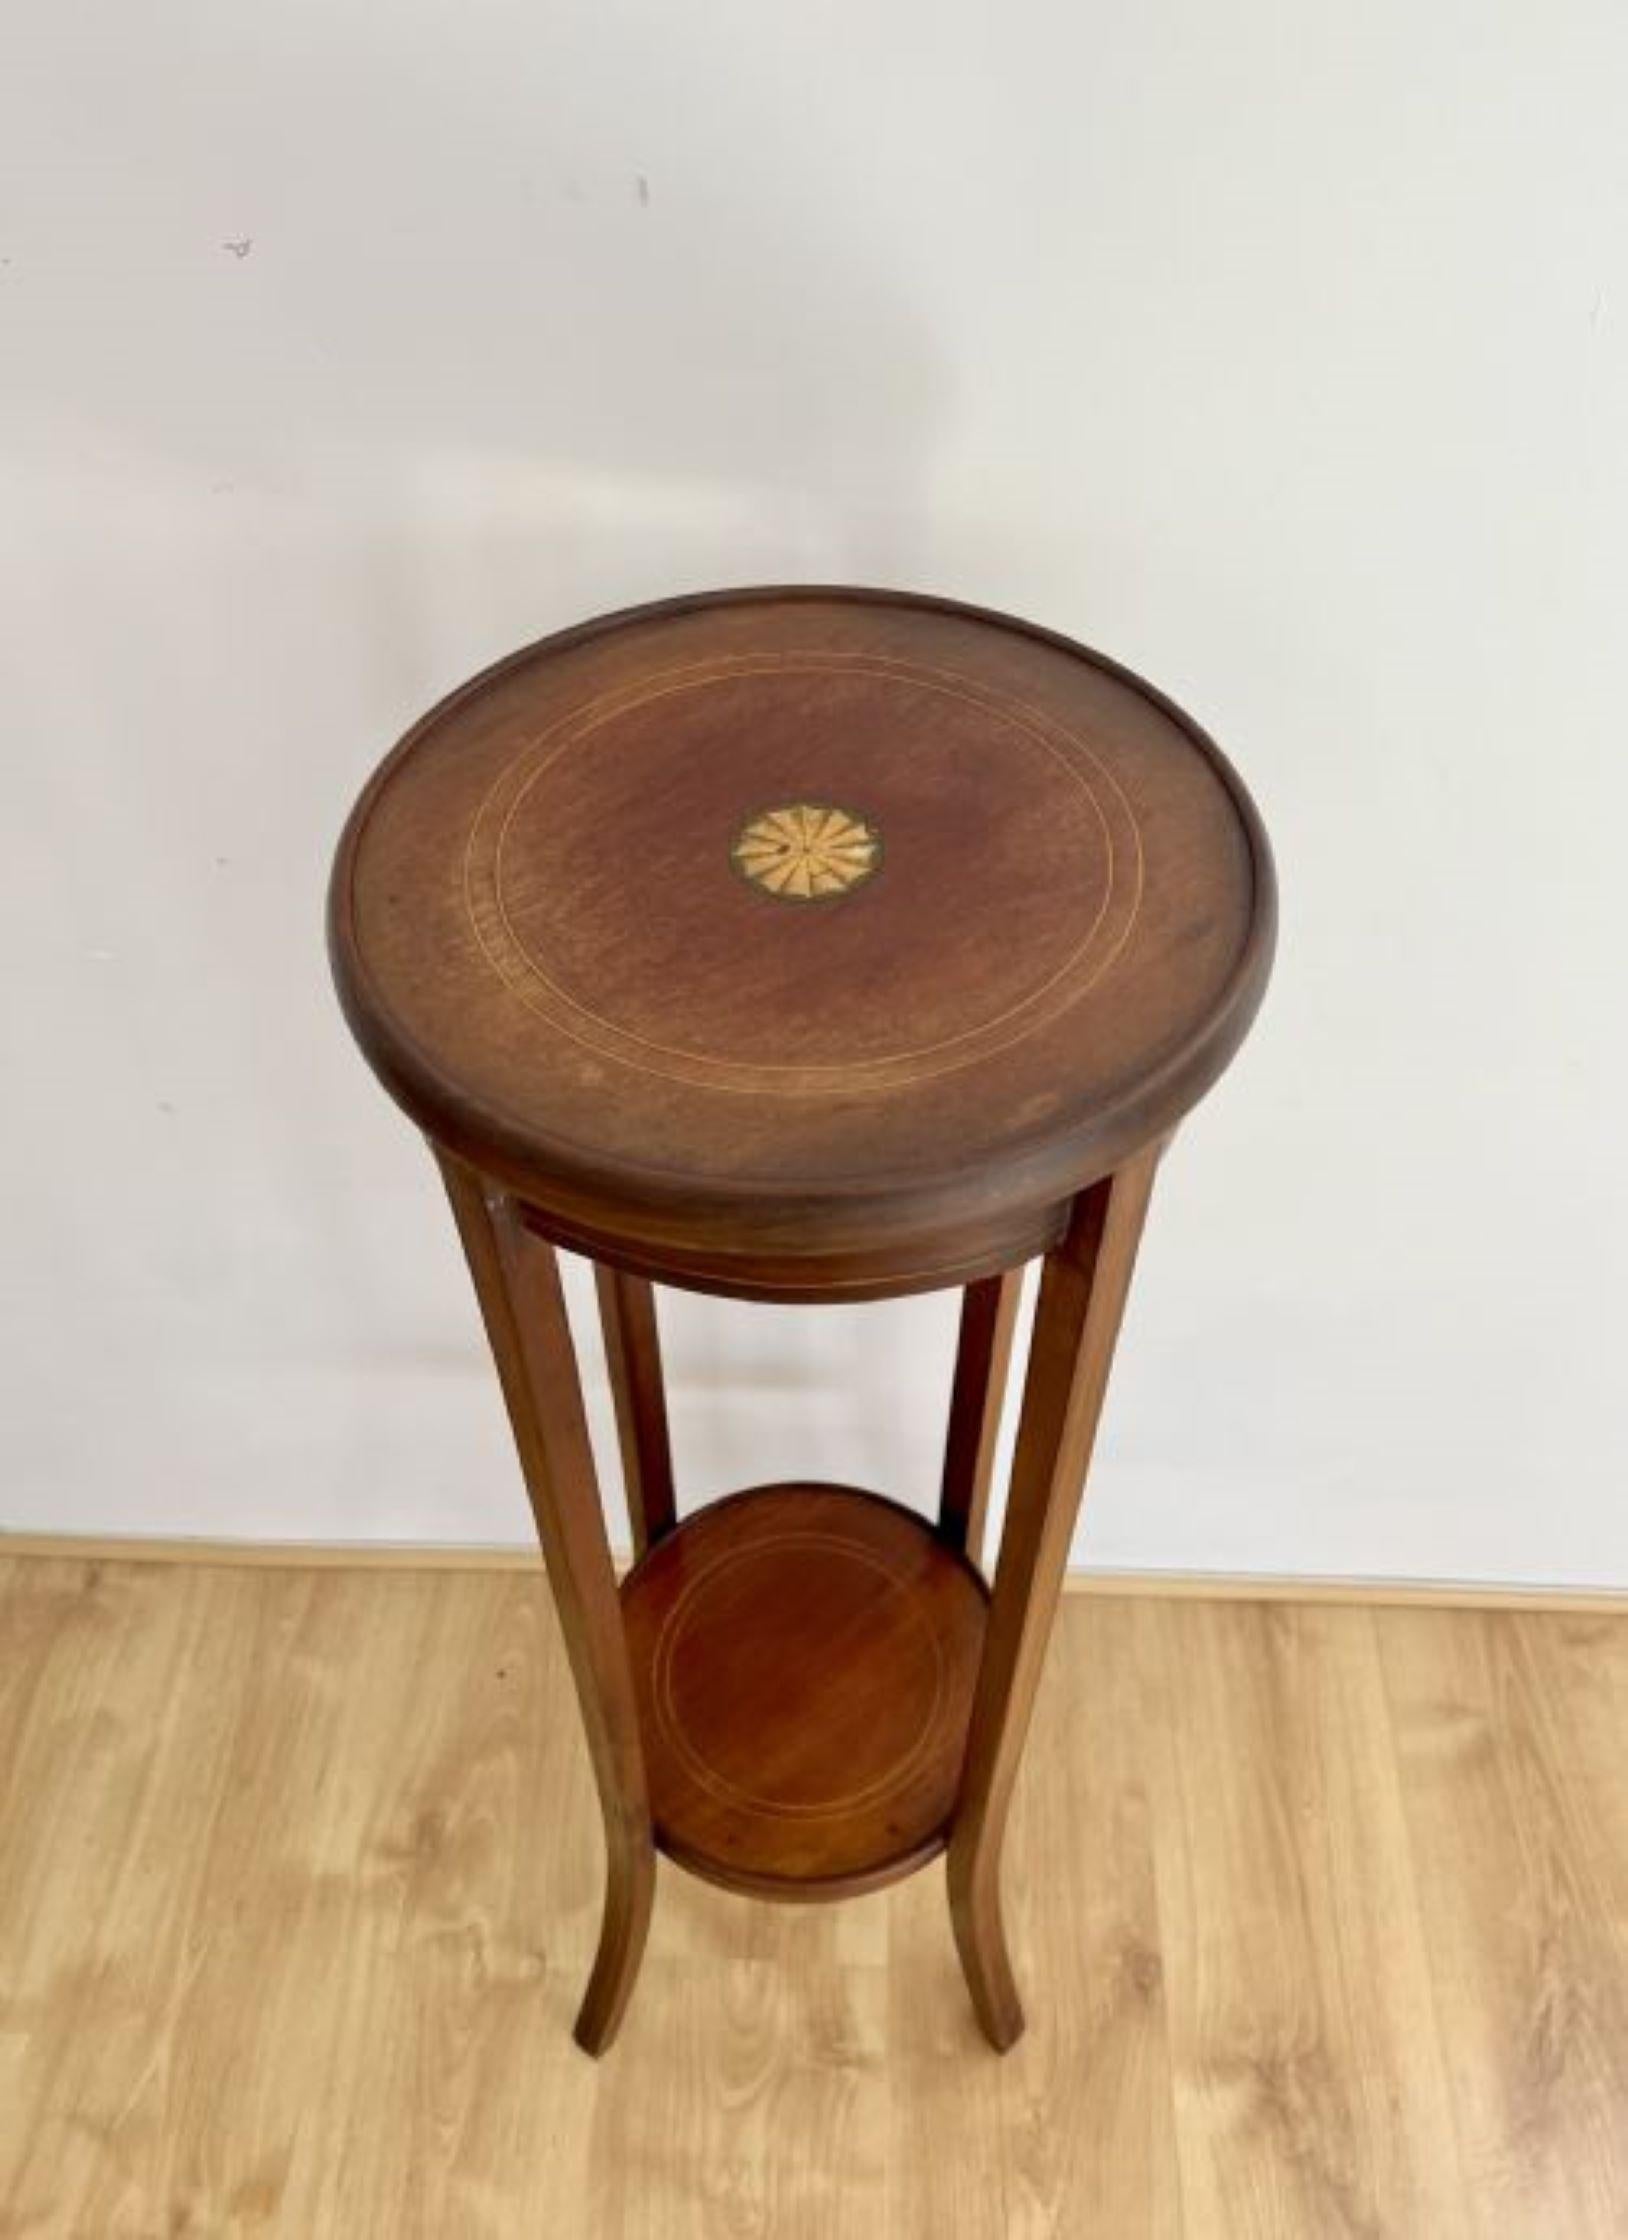 Antique Edwardian quality mahogany inlaid plant stand having a quality antique Edwardian mahogany plant stand with satinwood inlaid stringing and a satinwood inlaid shell to the centre of the circular top, standing on four elegant tapering legs